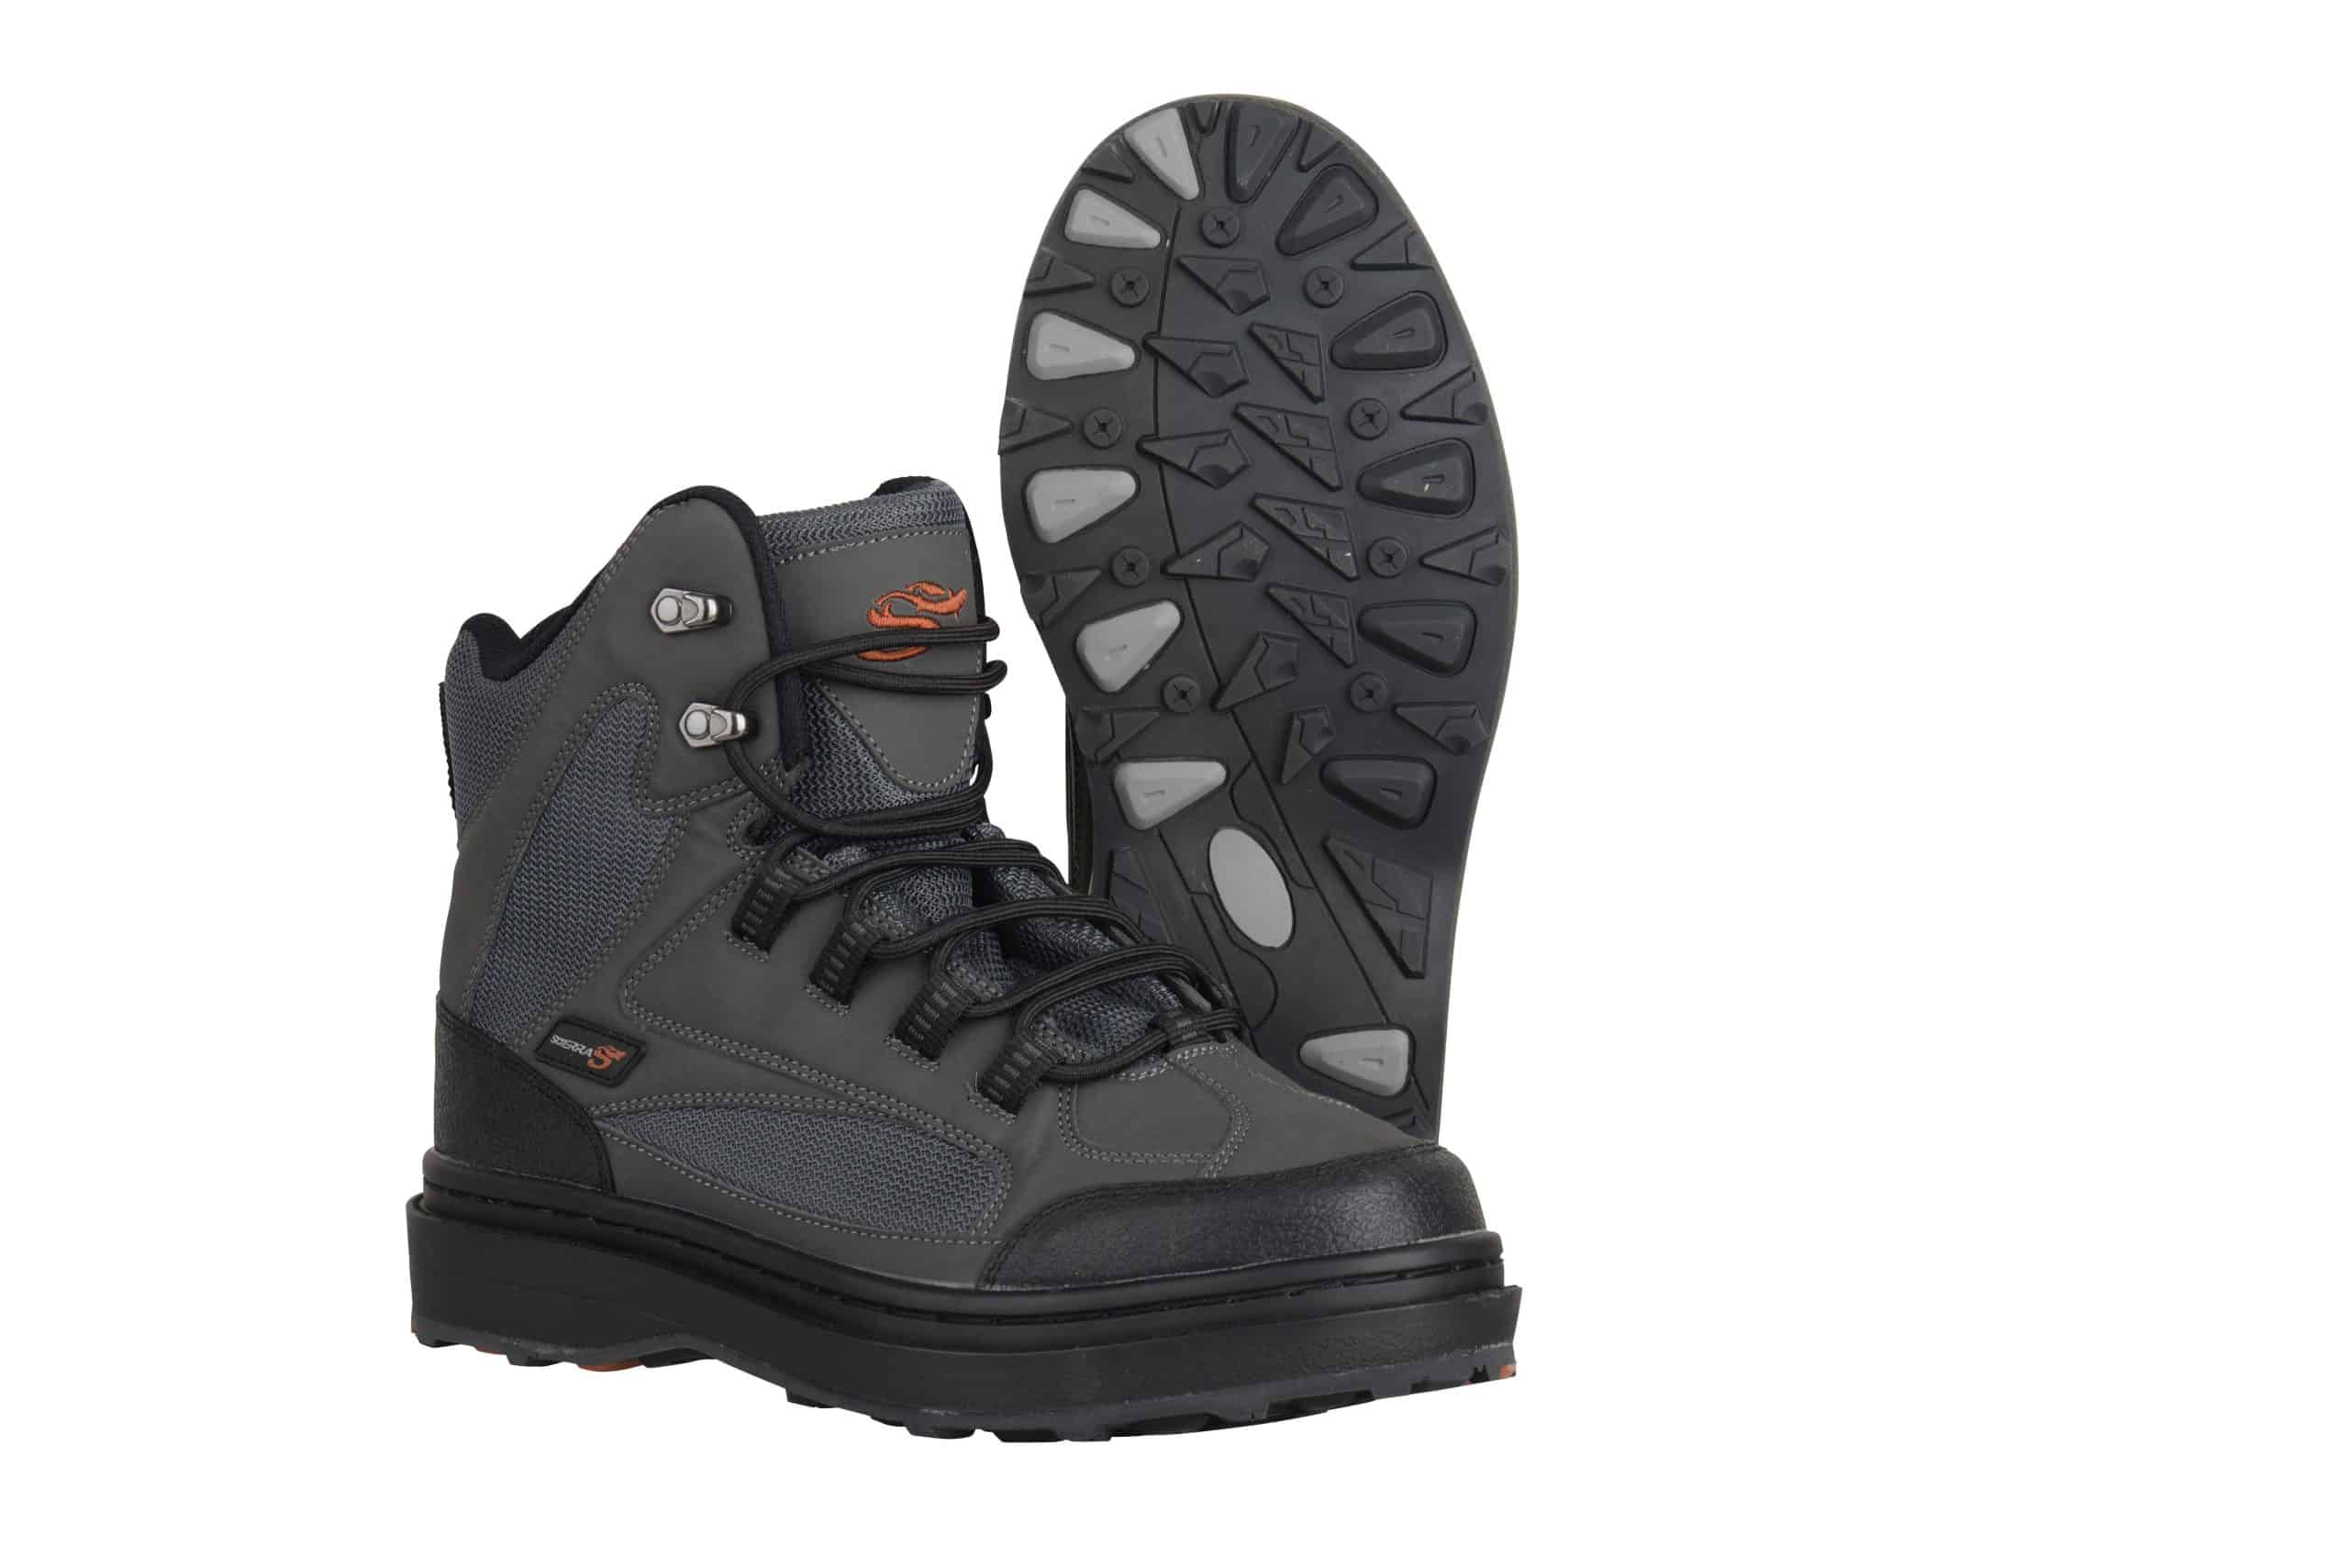 Sceirra Tracer Cleated Wading Boots